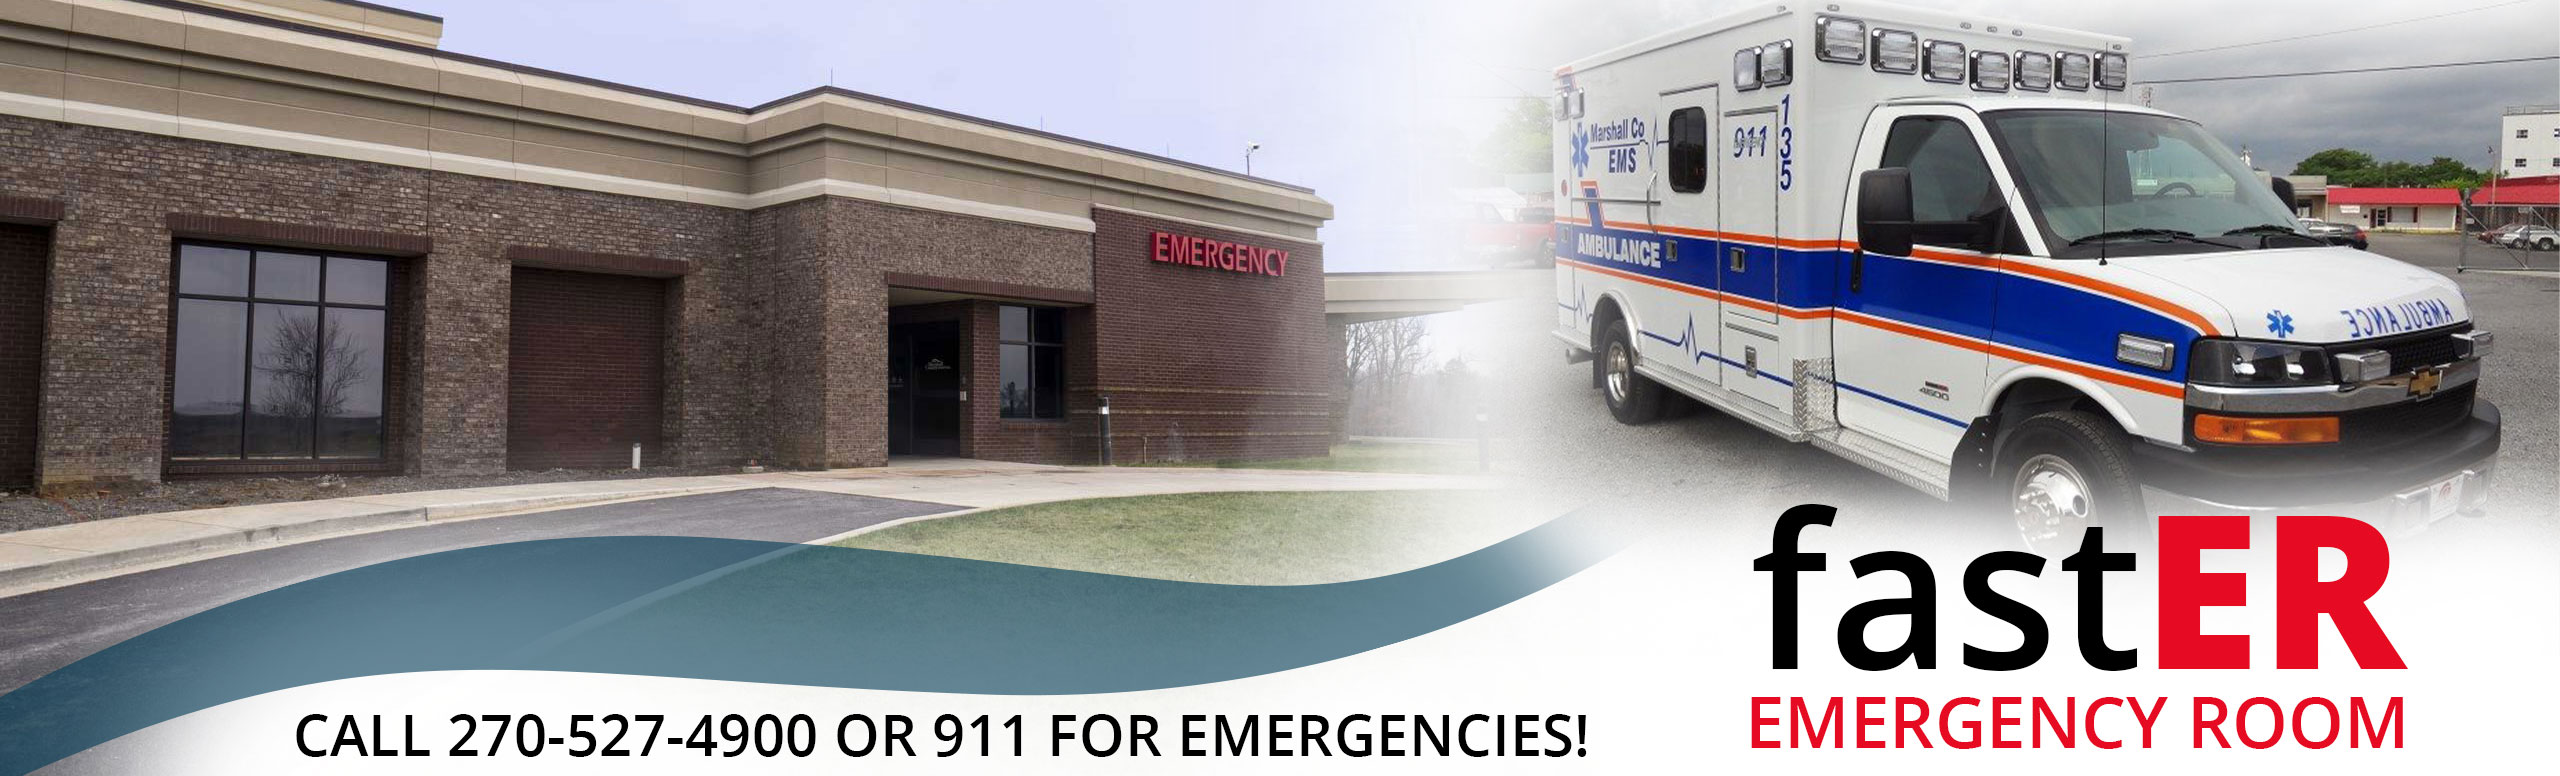 Call 270-527-4900 or 911 for Emergencies!
fastER EMERGENCY ROOM